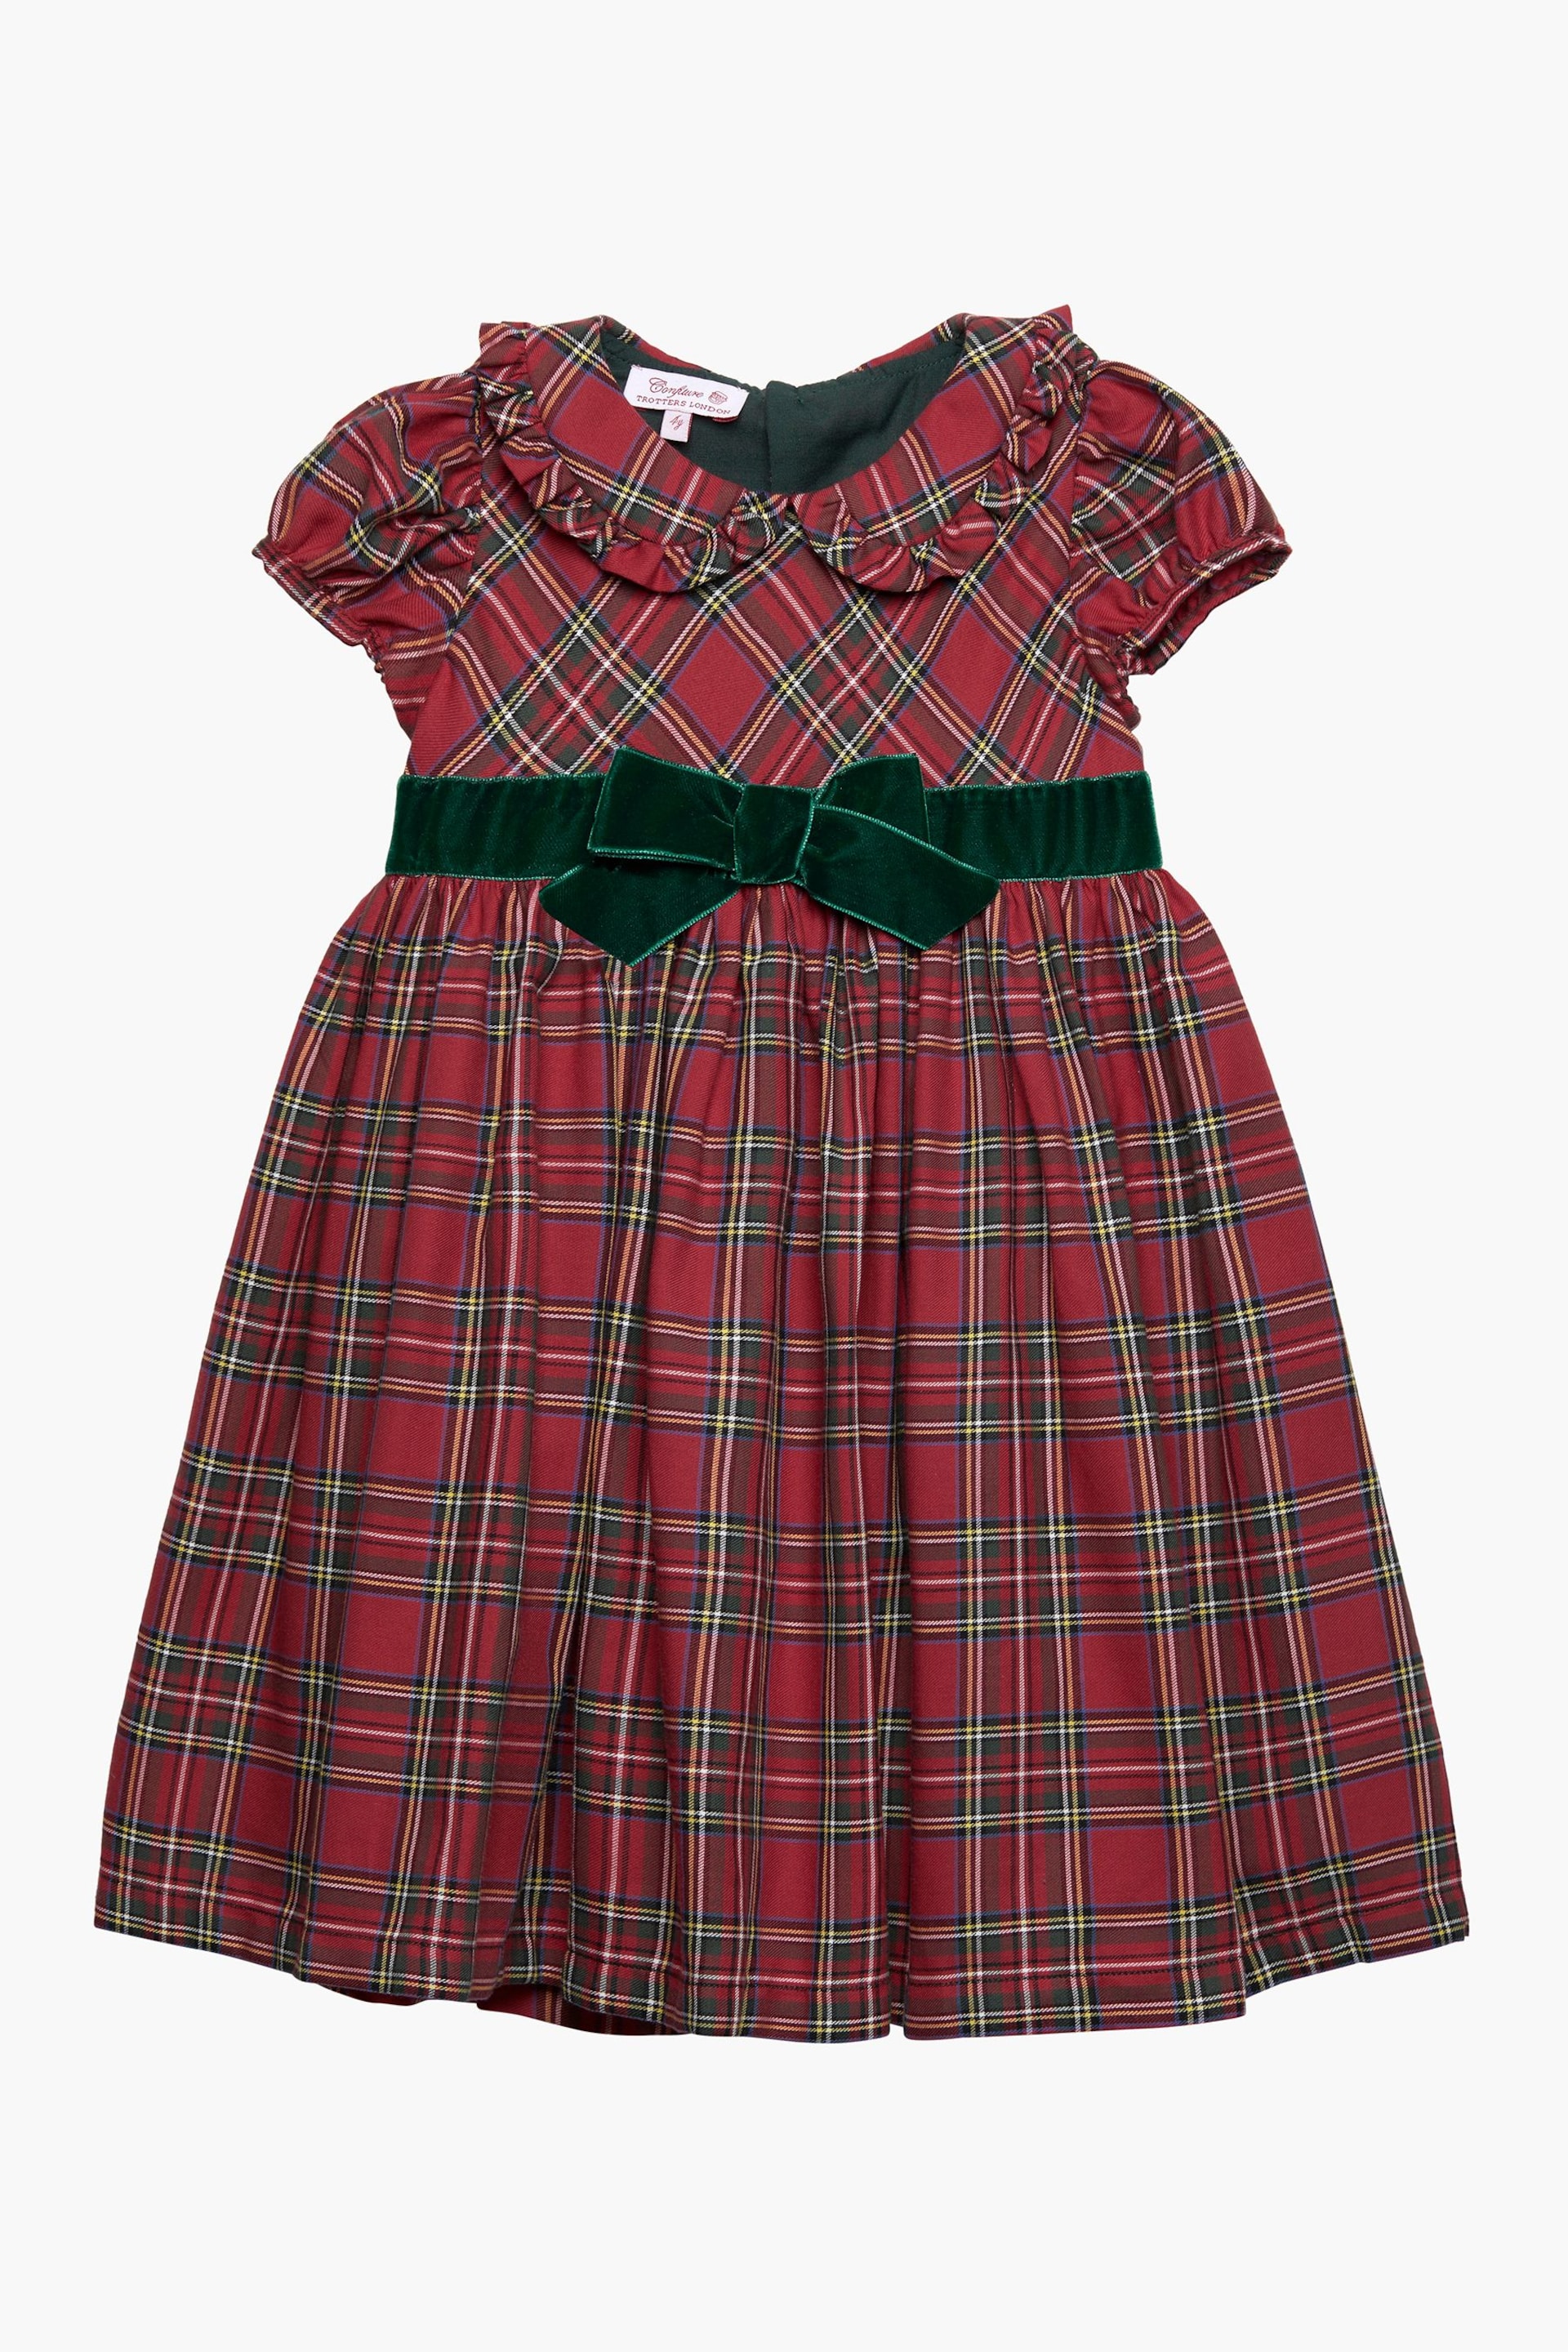 Trotters London Red Tartan Katie Cotton Party Dress - Image 1 of 2